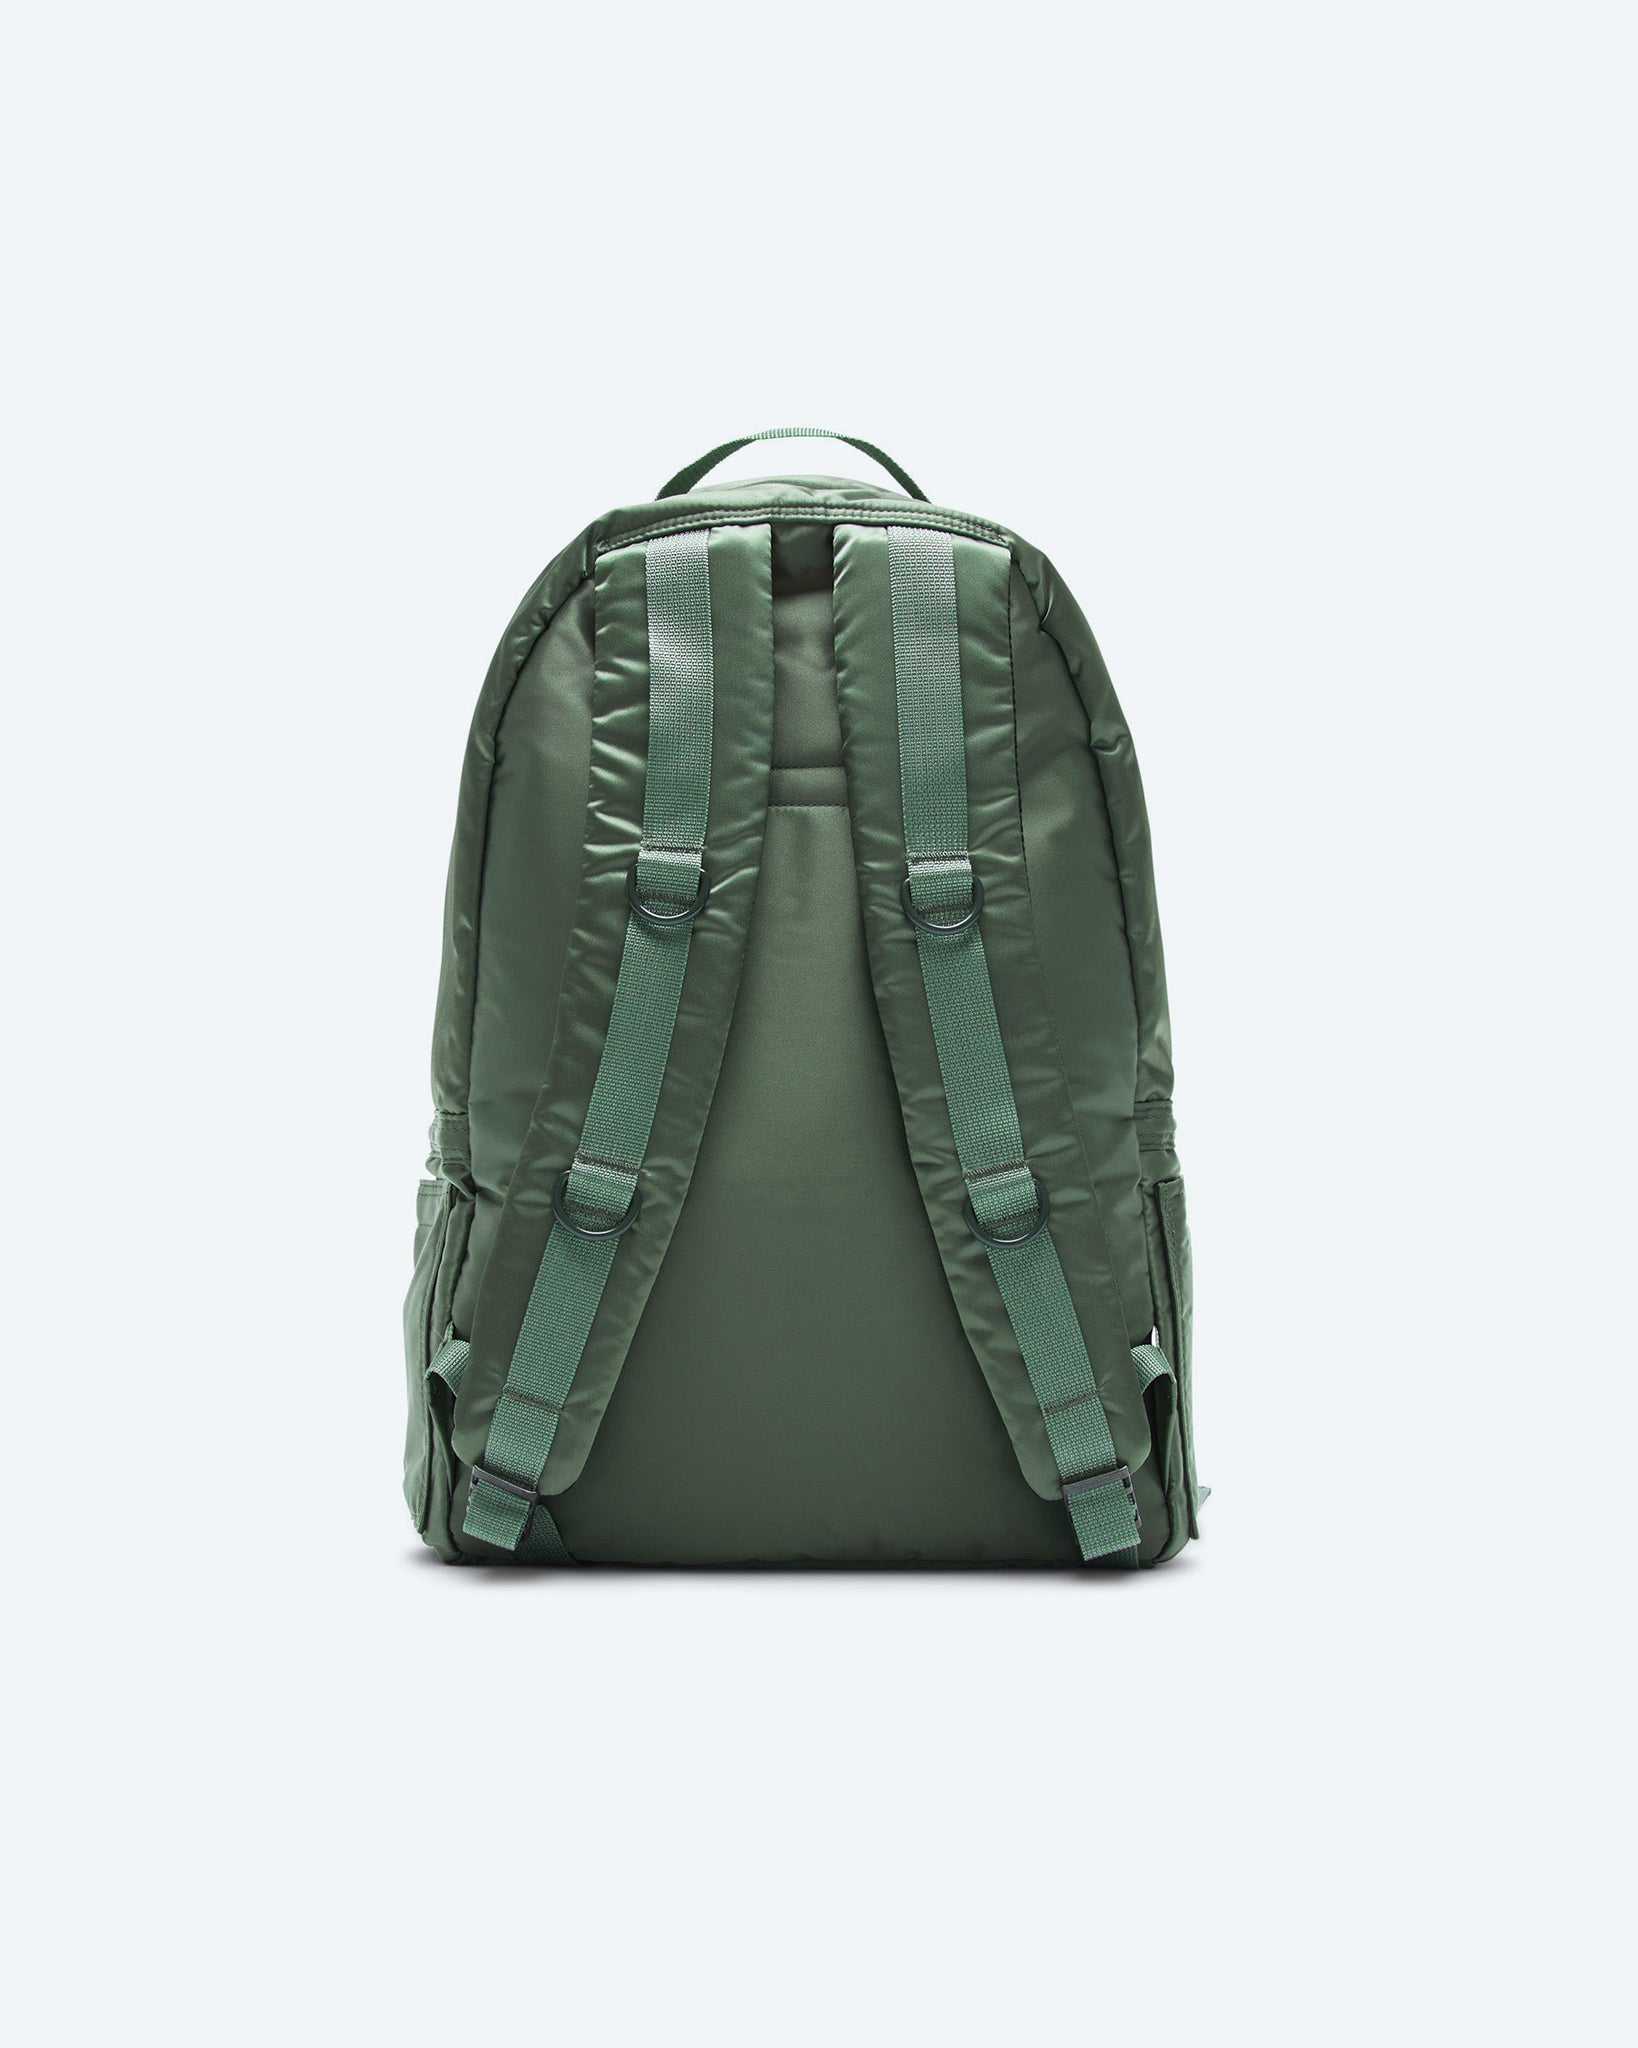 Porter Day Pack | Reigning Champ